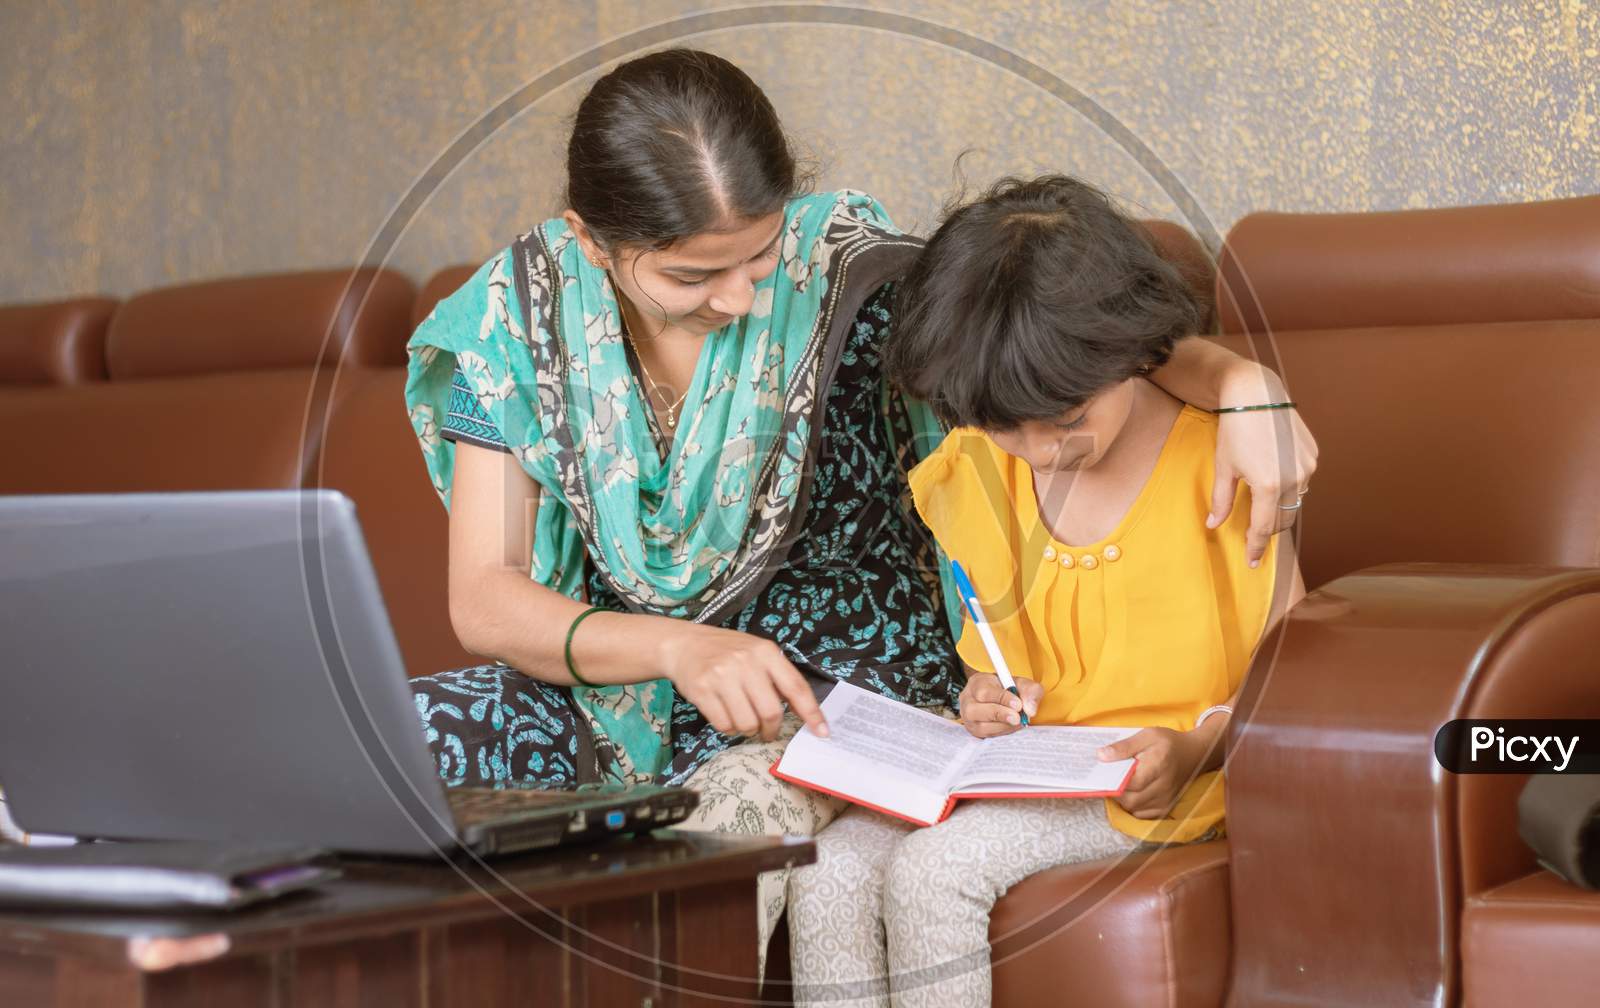 Young Mother Teaching Her Child While Working On Laptop - Concept Of People Lifestyles And Technology, Work Form Home Or Wfh Reality